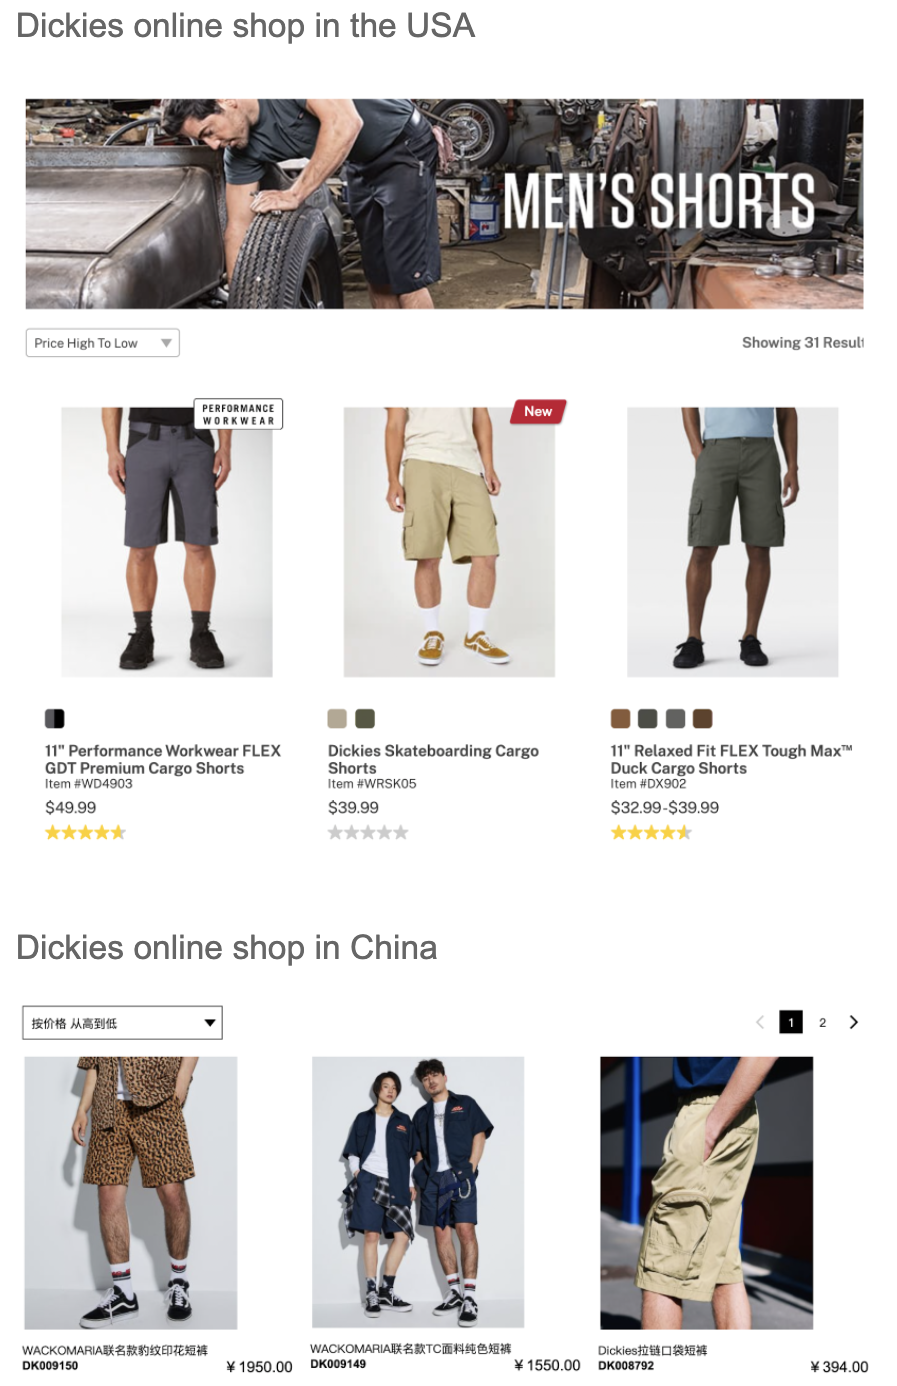 Source: Dickies US and China websites, Dickies’ different brand positioning in the US (top) and in China (bottom) price discrepancies in China 